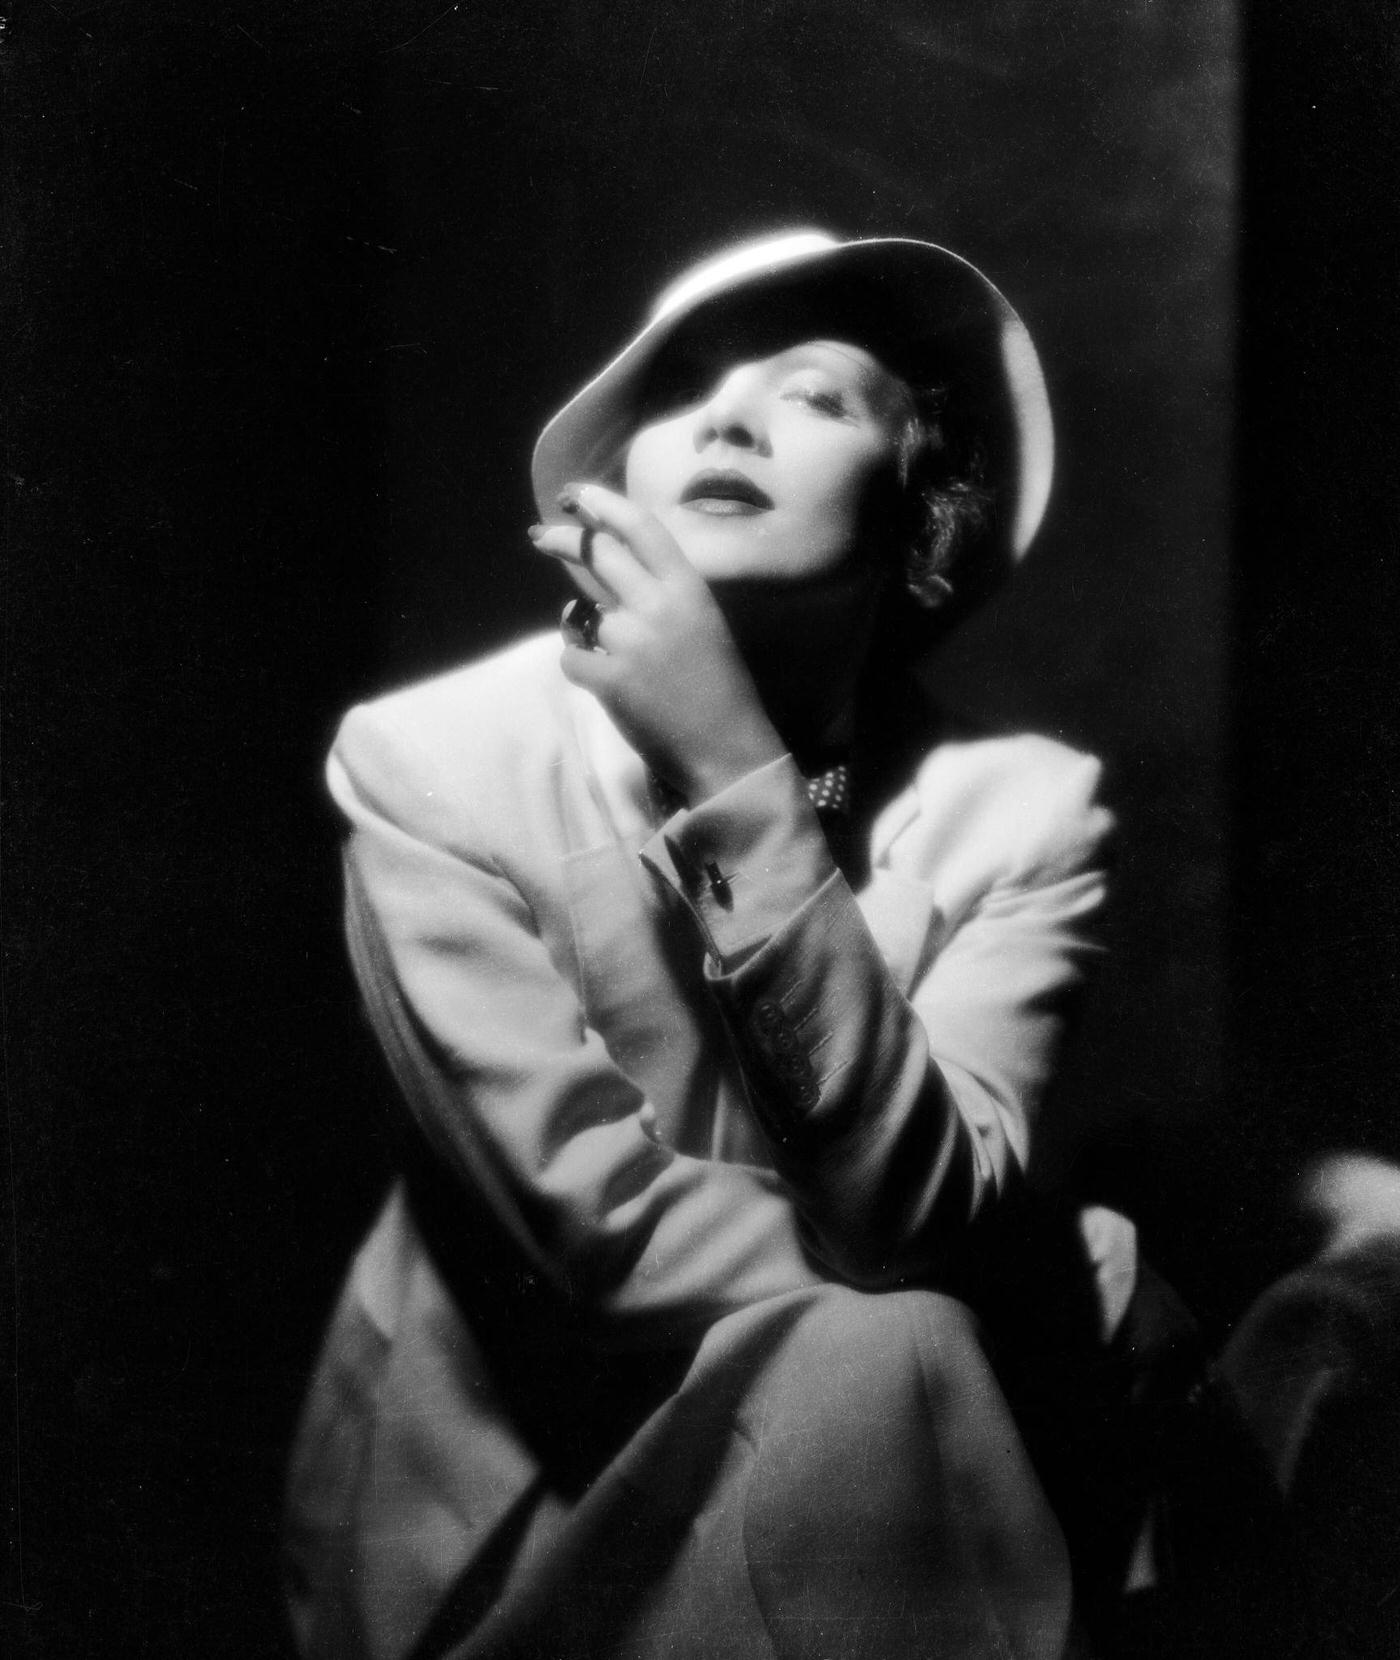 Marlene Dietrich wears a soft pull-on hat while smoking a cigarette.